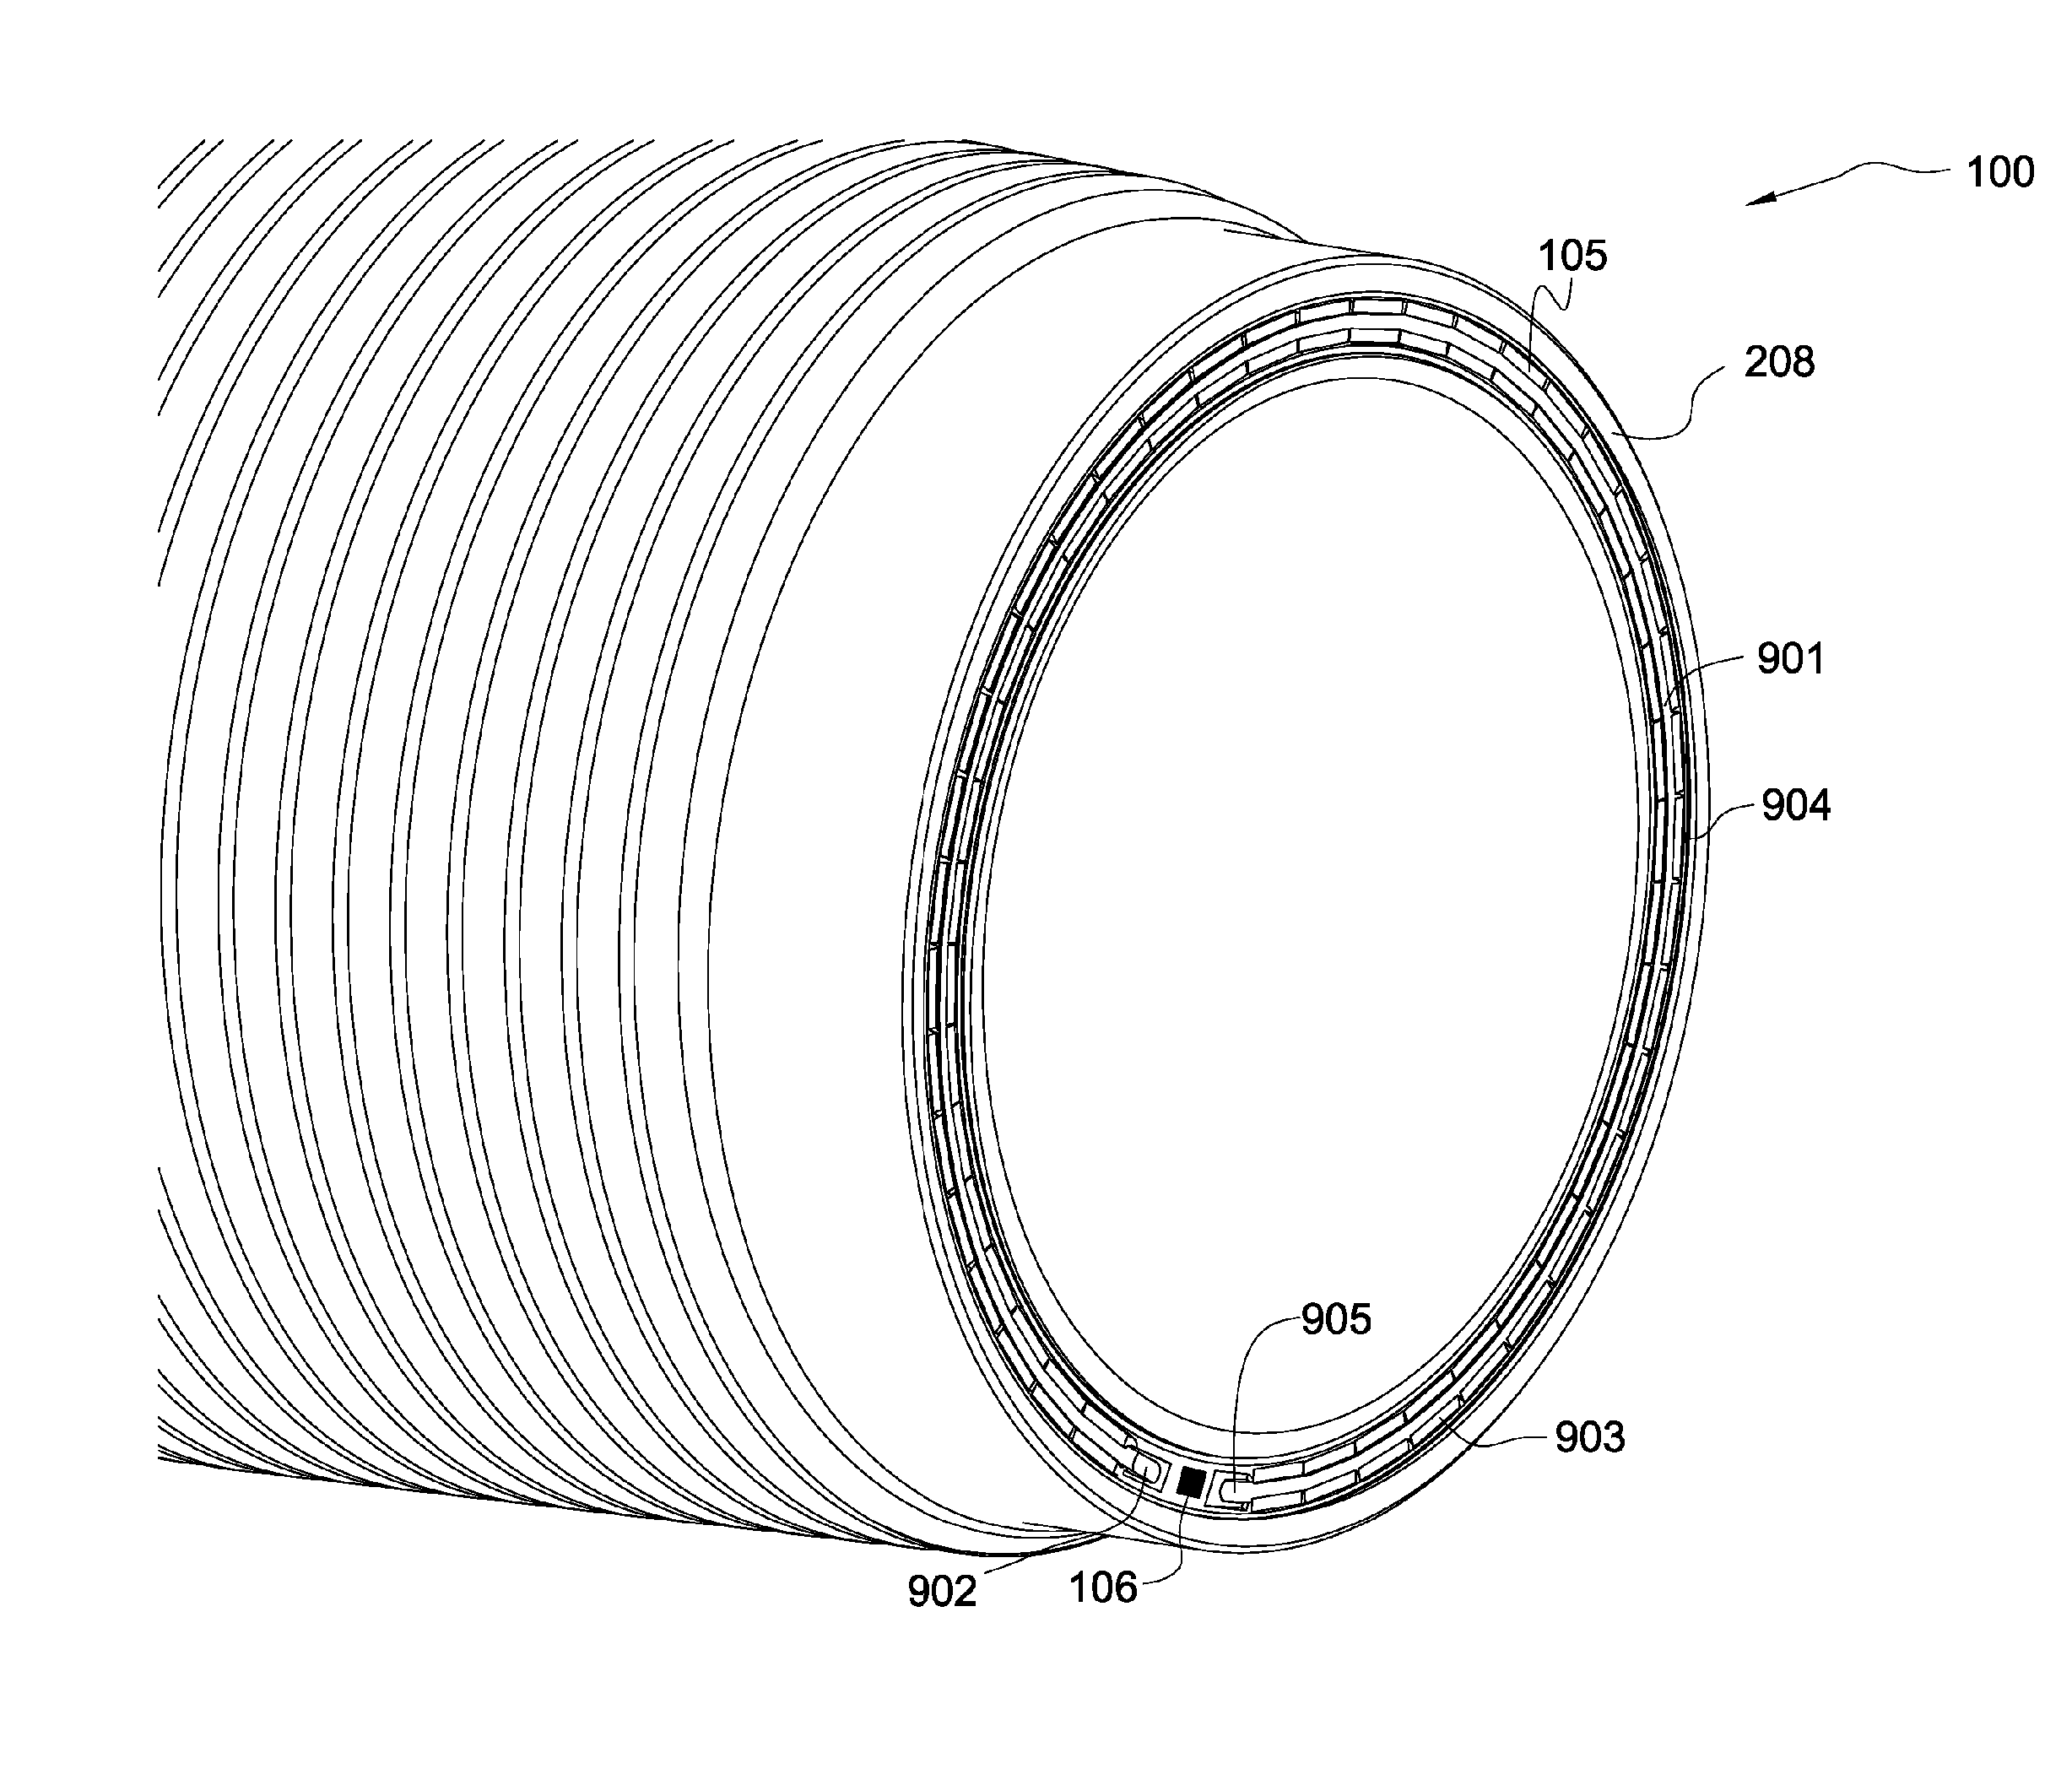 Downhole Tool with Integrated Circuit